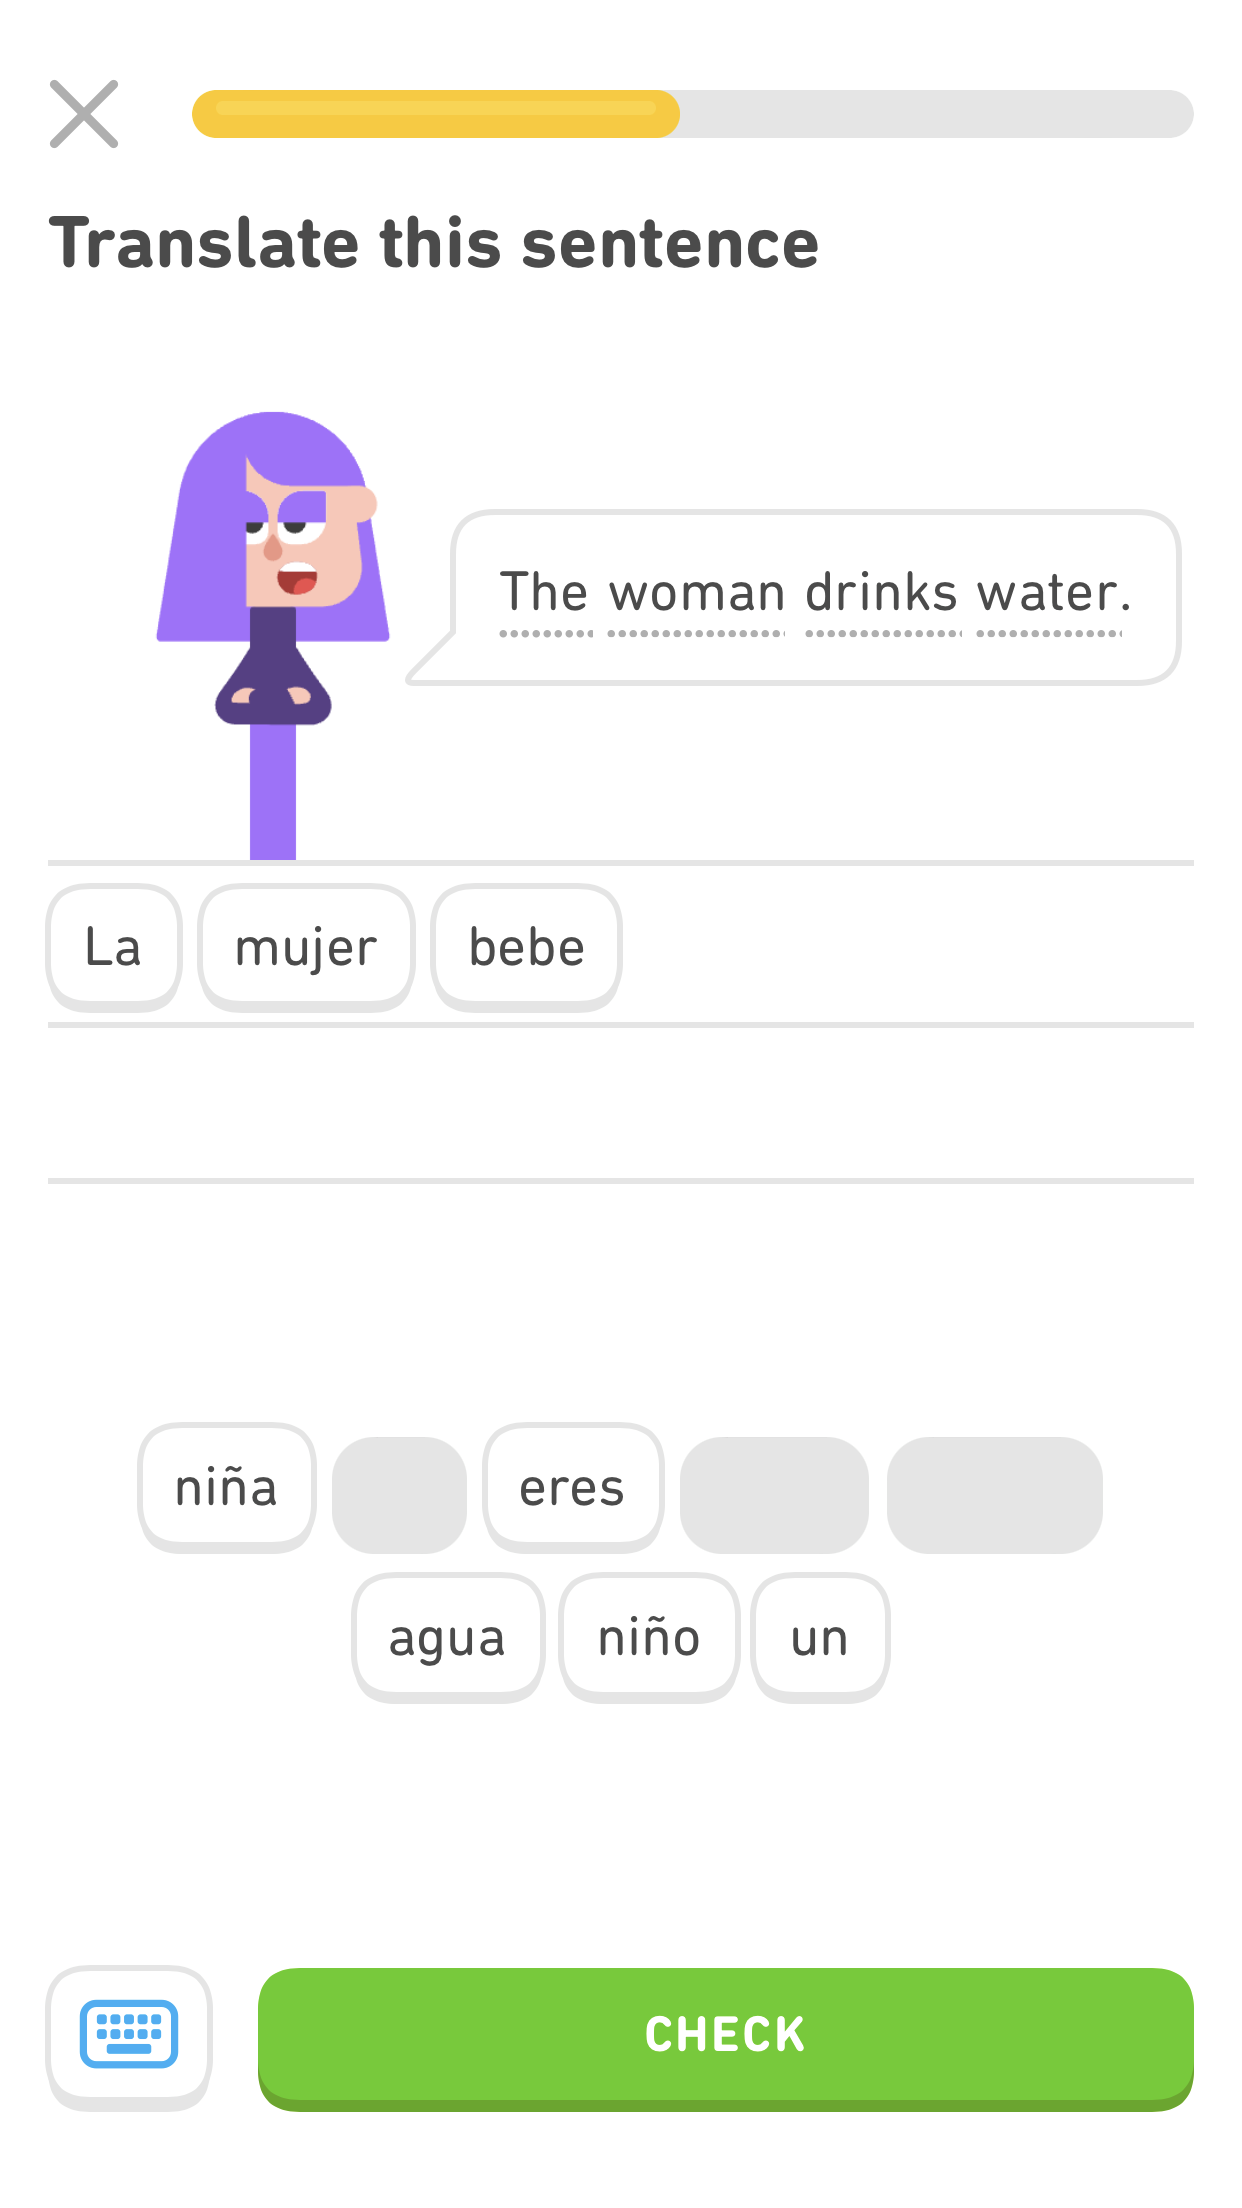 screenshot of an exercise with the English sentence 'The woman drinks water.' The Spanish equivalent is partially formed by the word tiles below, which read 'La mujer bebe.'